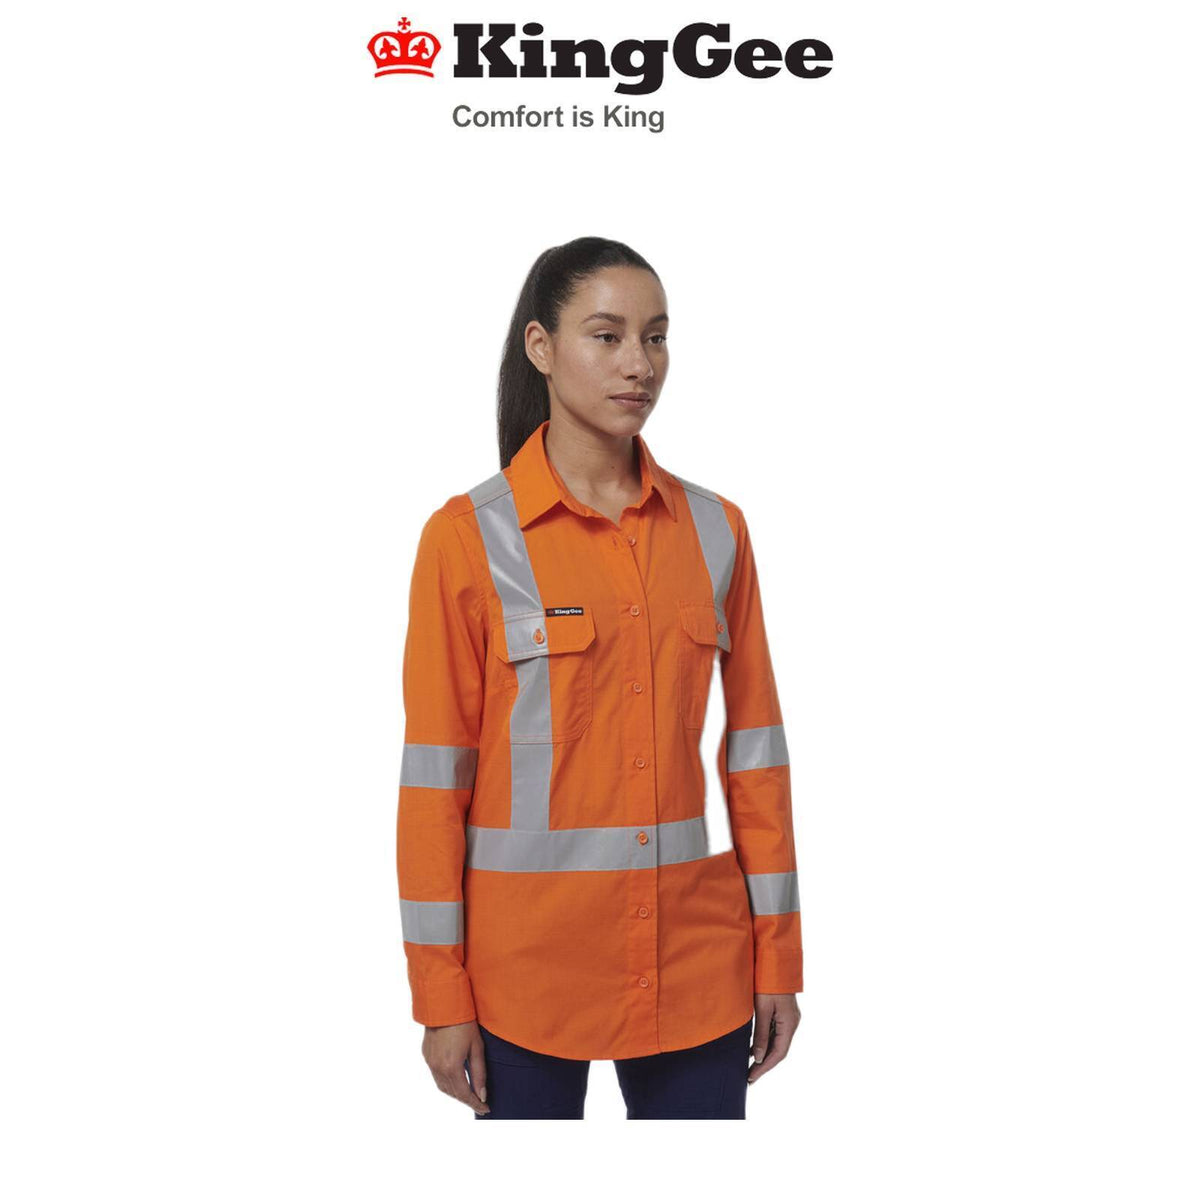 KingGee Womens Safety Workcool Vented X Back Reflective Breathable Shirt K44233